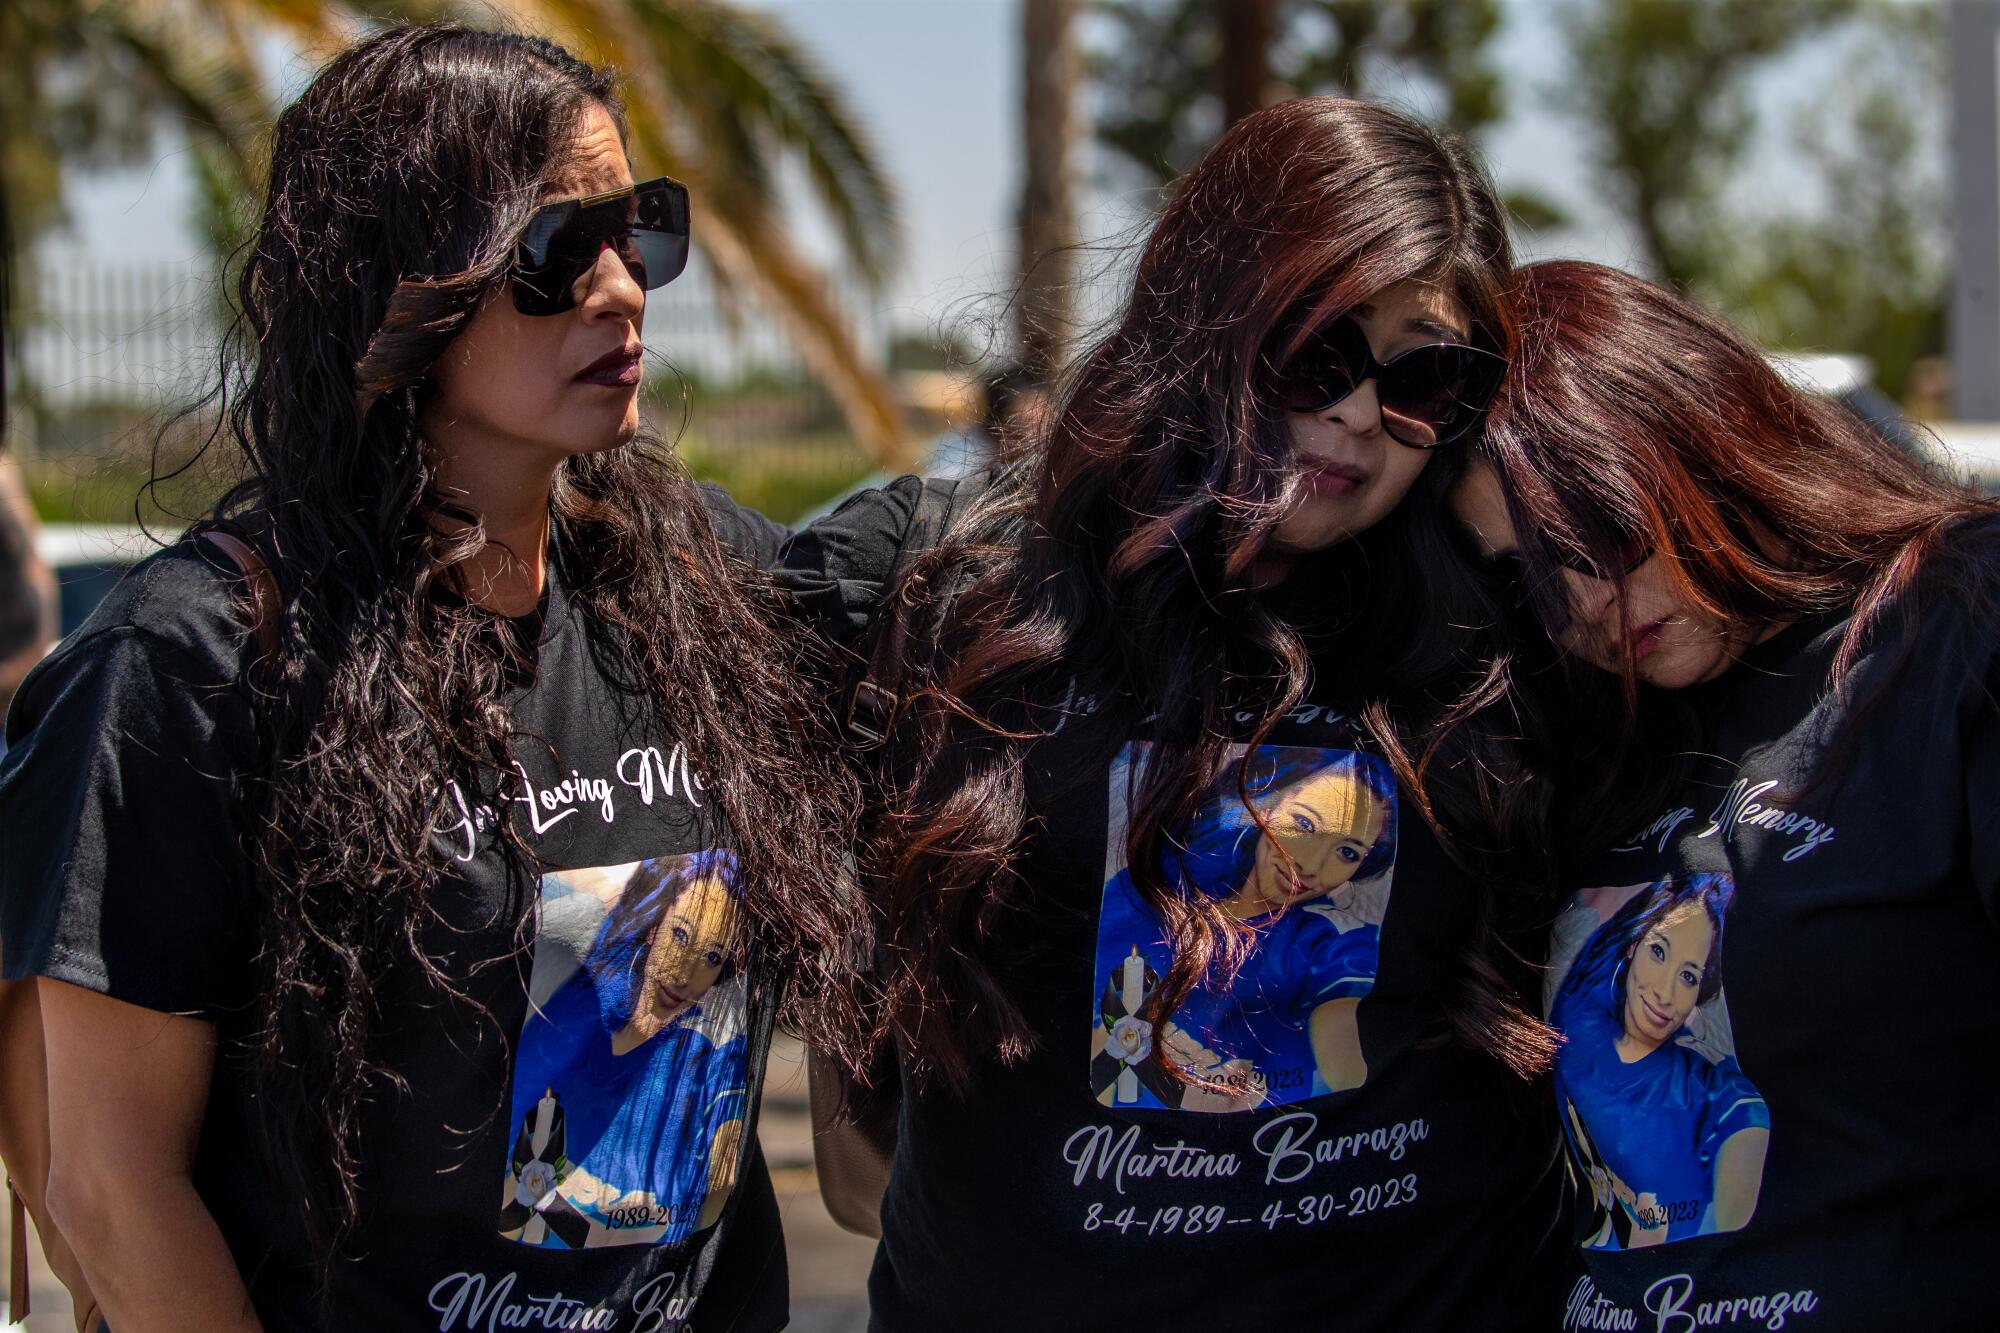 Three women wearing sunglasses and memorial T-shirts with a woman's photo embrace and lean on one another